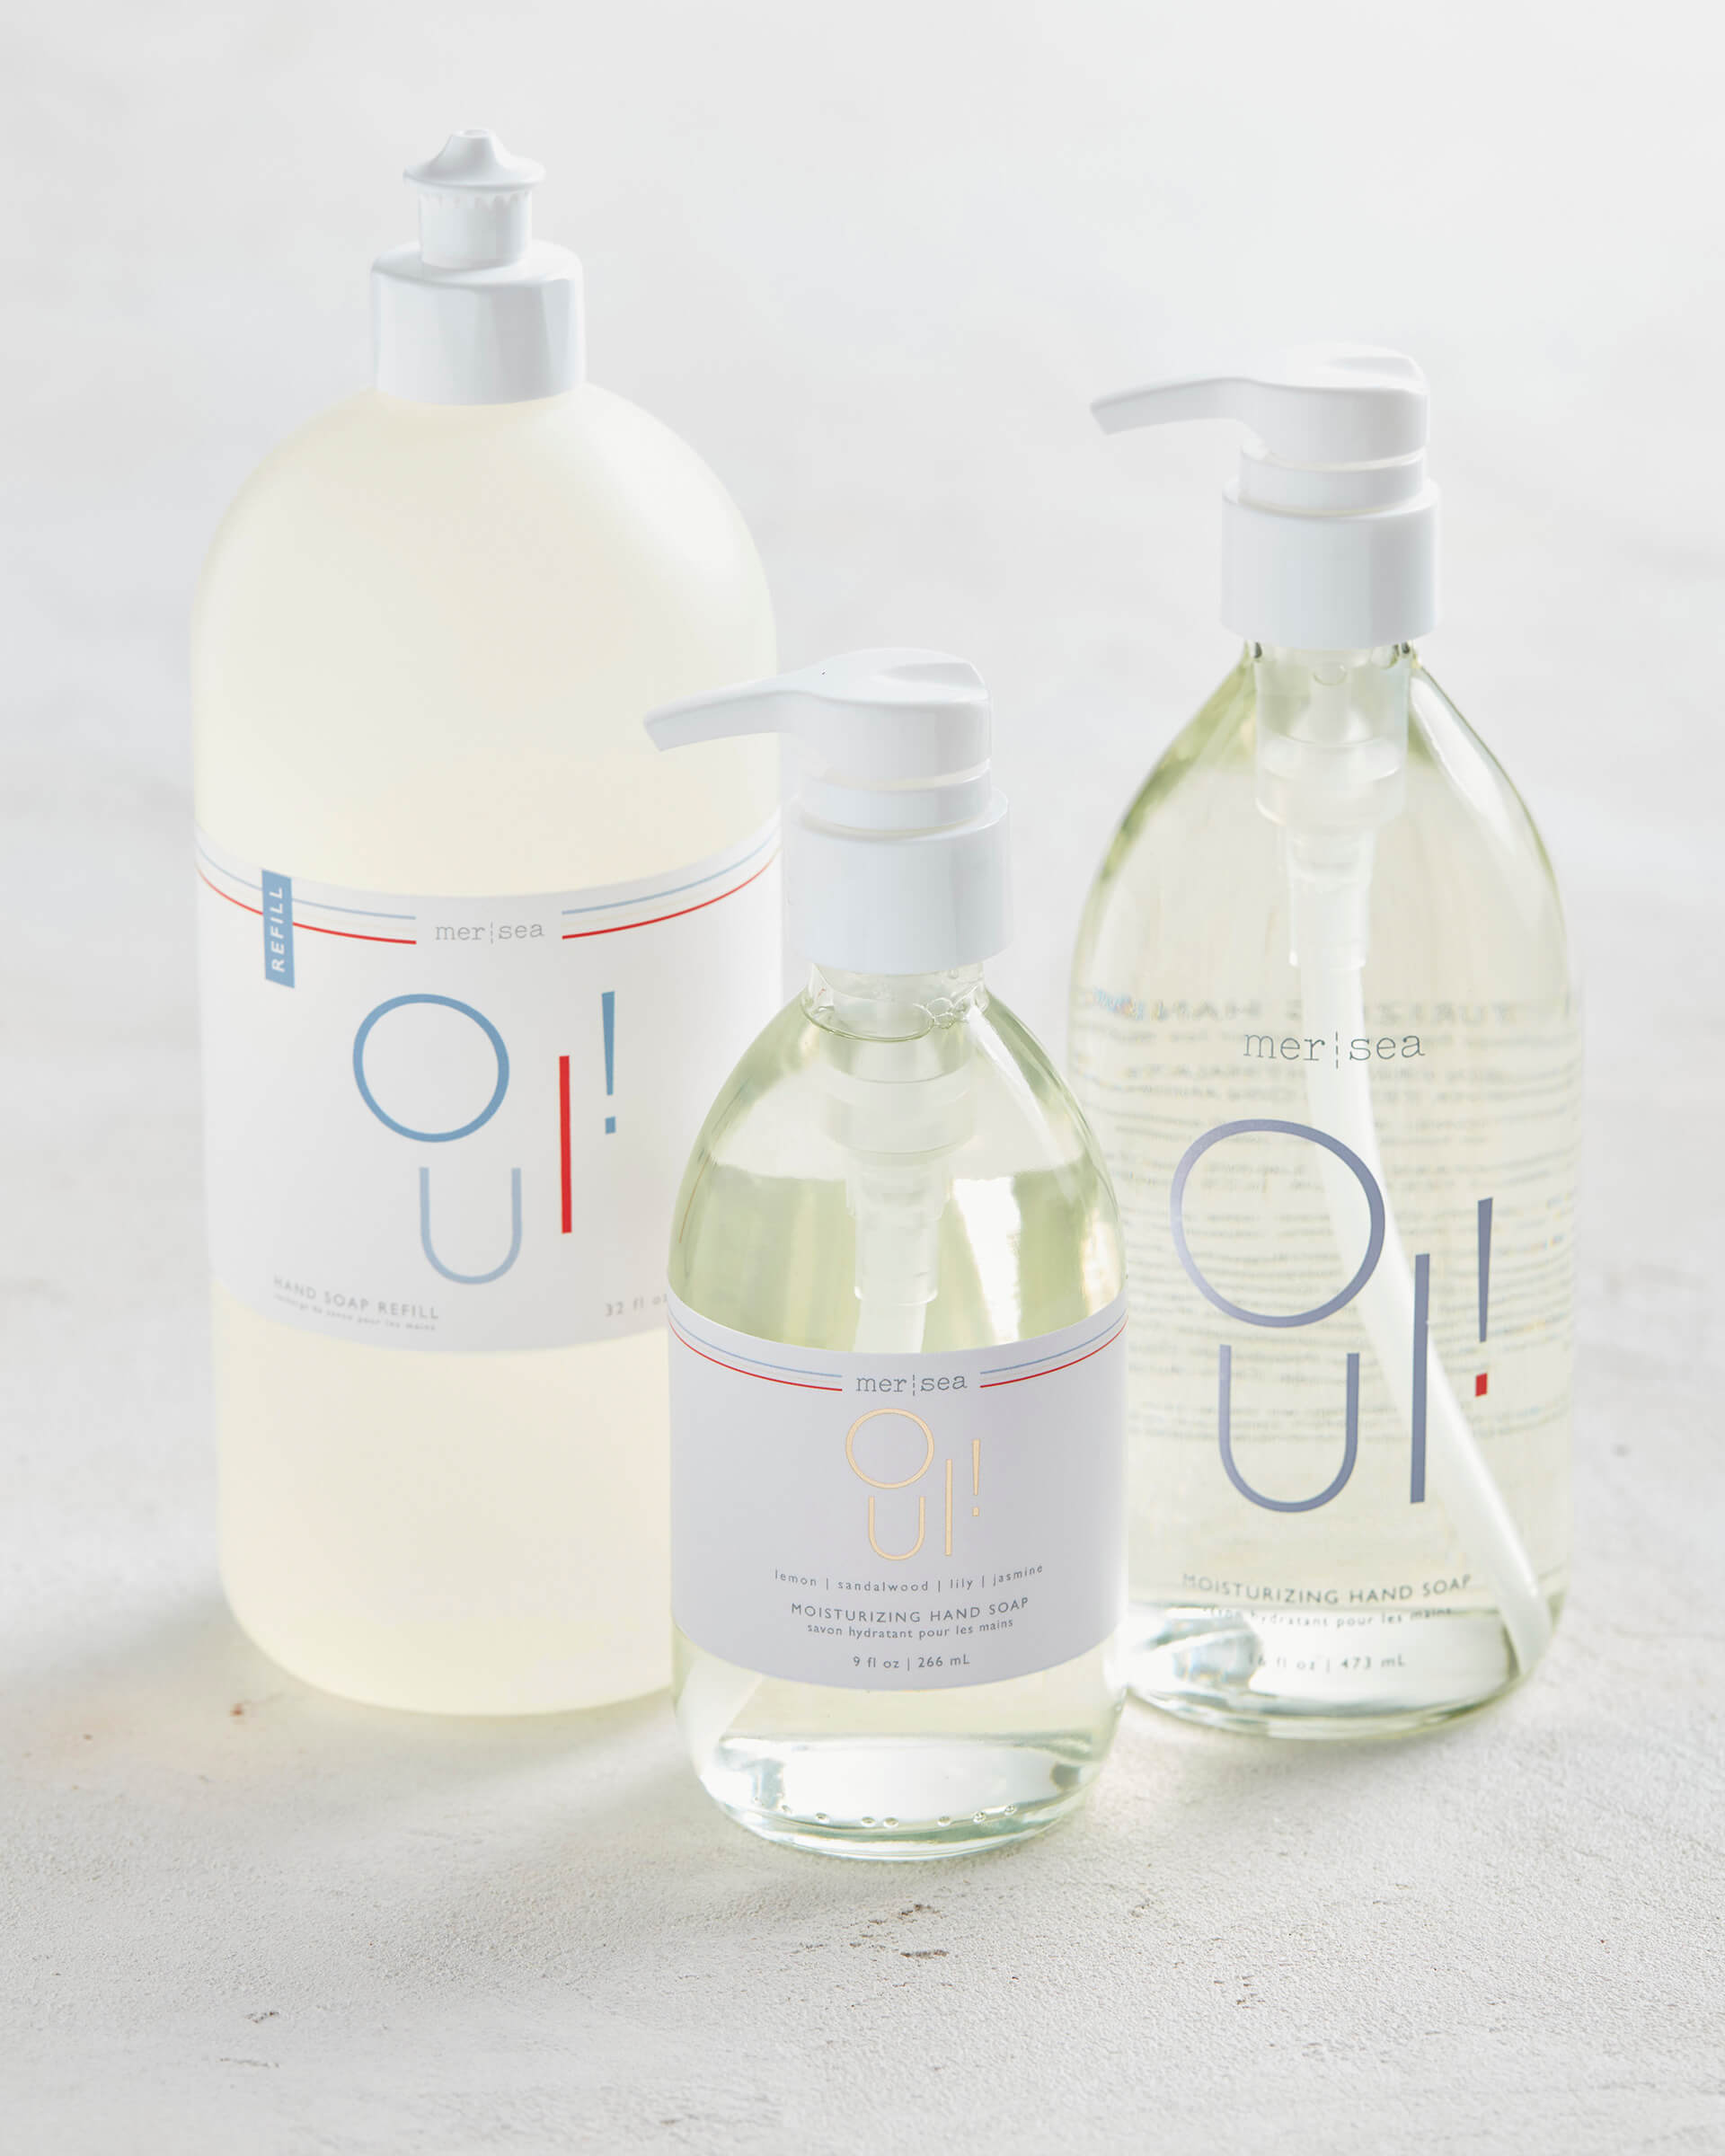 OUI! scented large liquid hand soap, liquid hand soap, and refill bottle sitting on white background